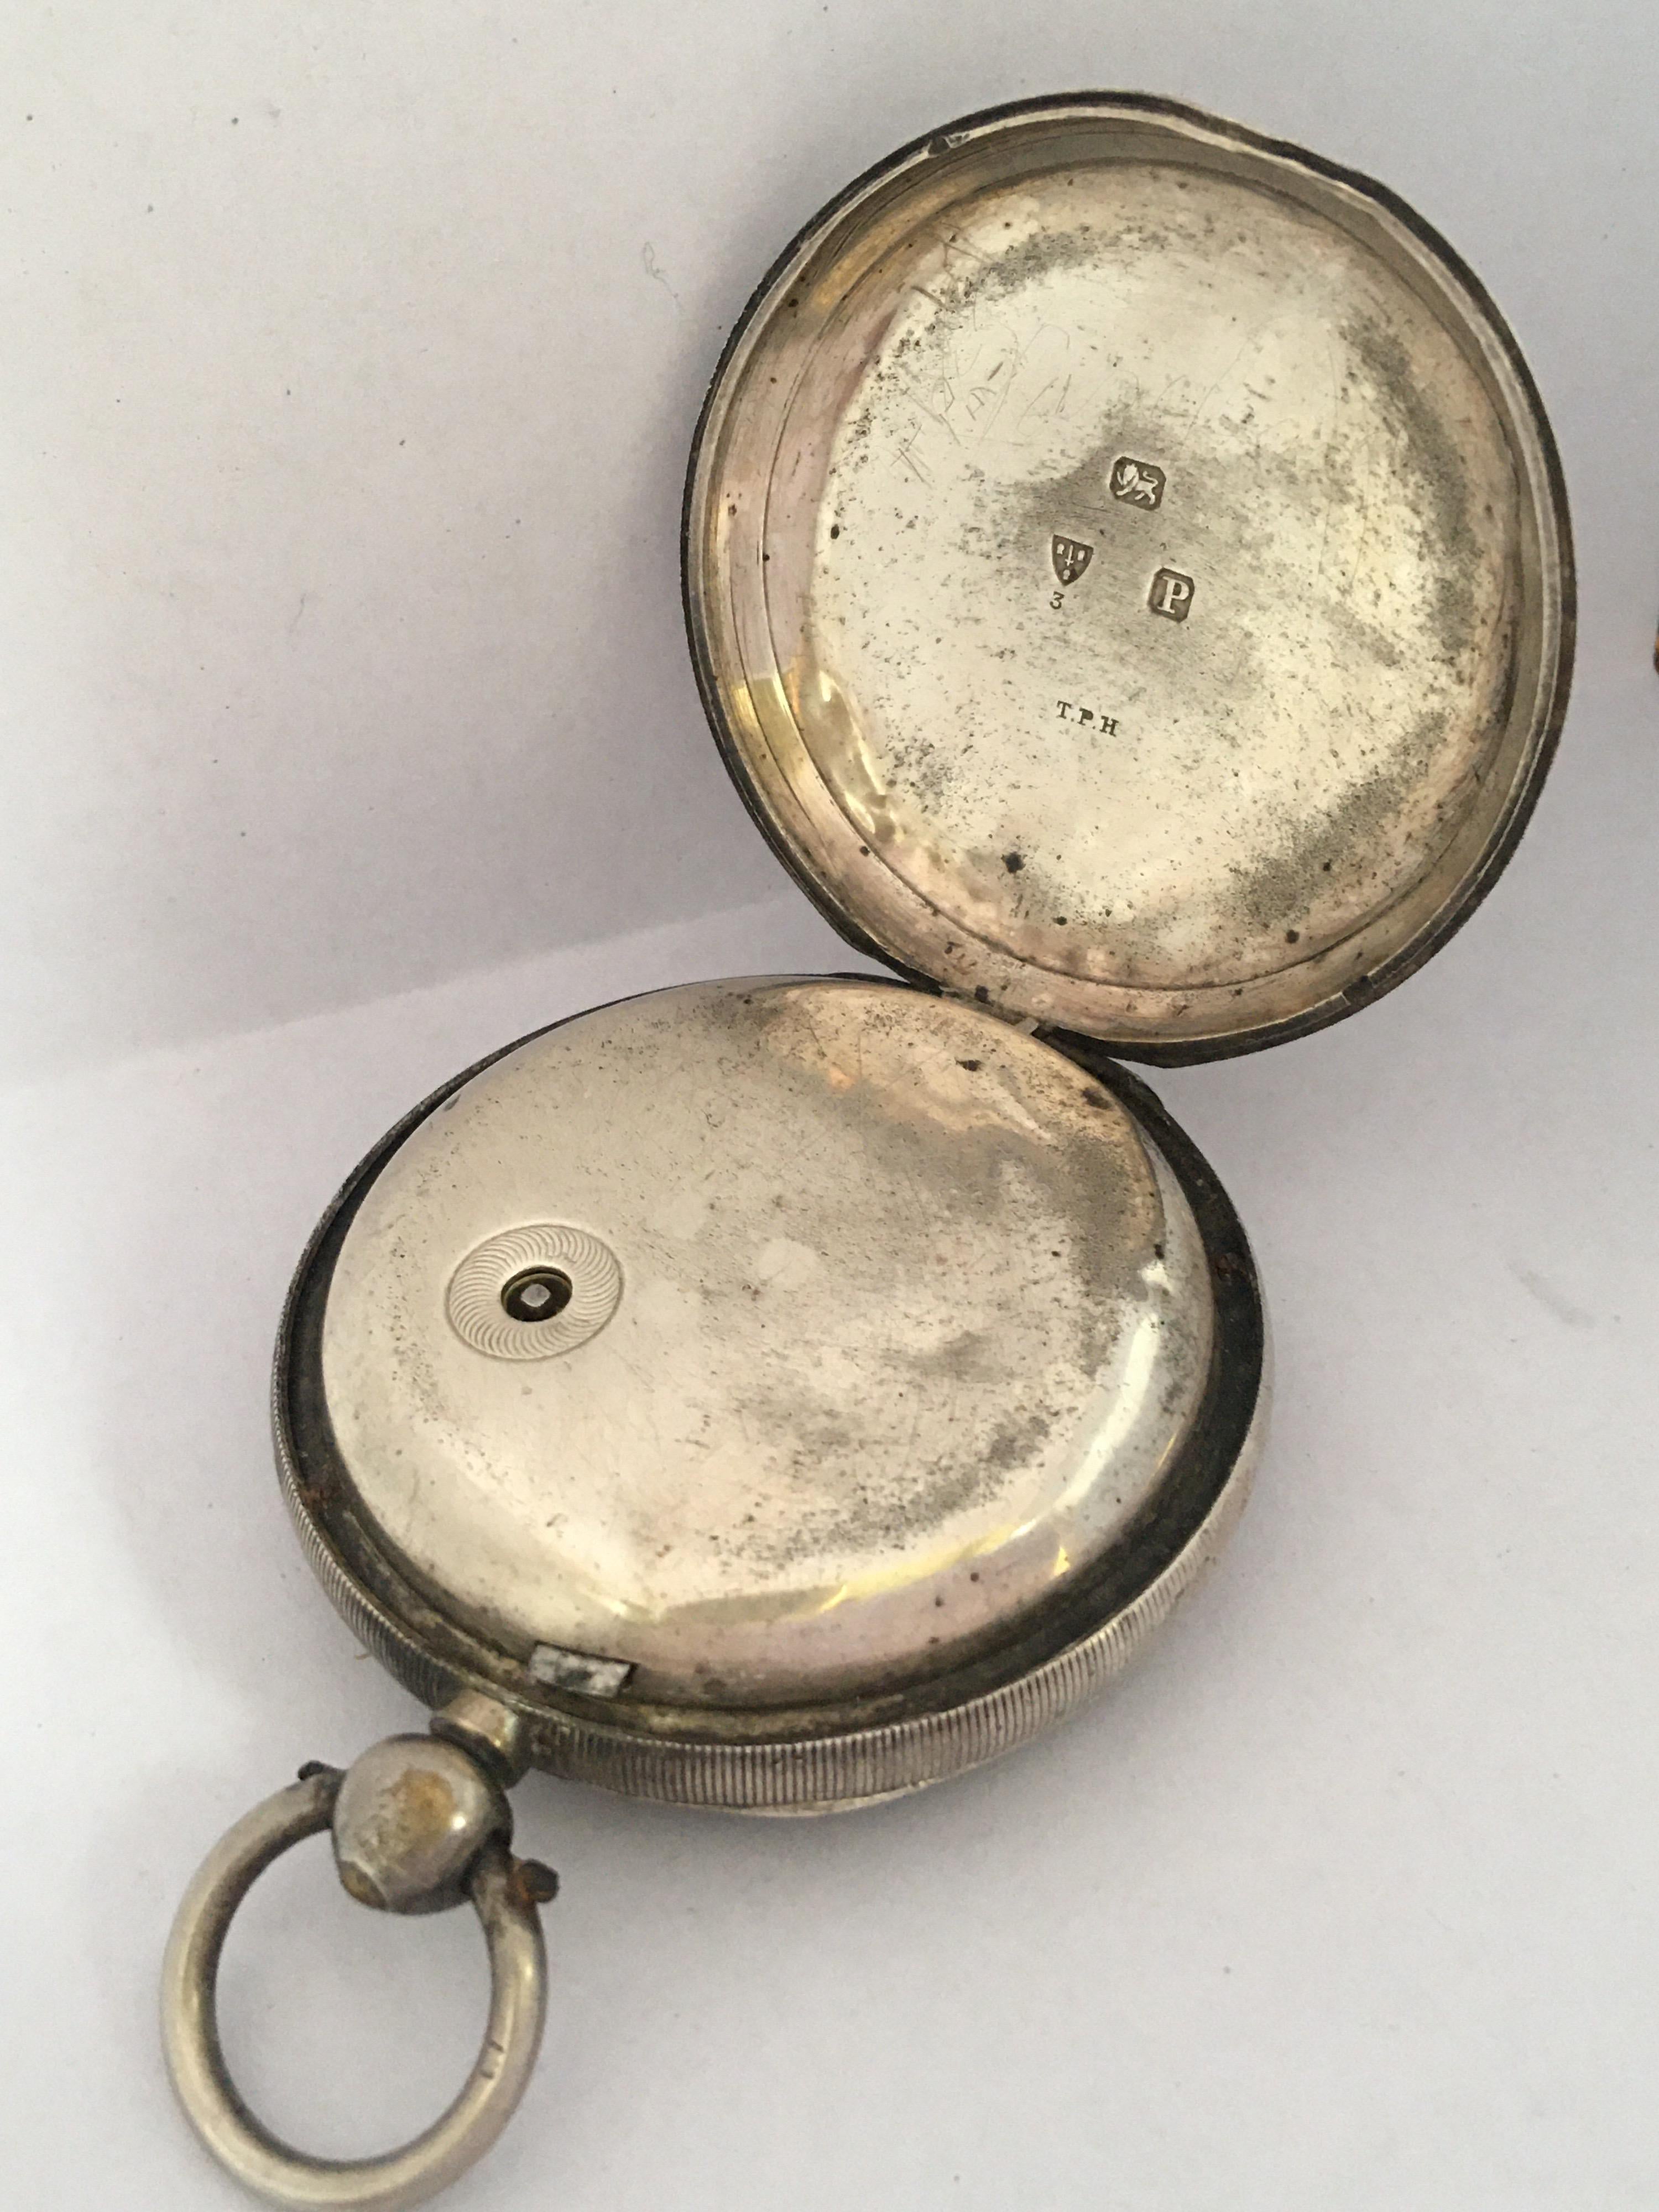 This beautiful heavy antique 56mm diameter (Excluding the crown) pocket watch is working and running well. Visible signs of ageing and wear with light surface marks on the glass and on the silver watch case. Visible dents and tore on the watch case